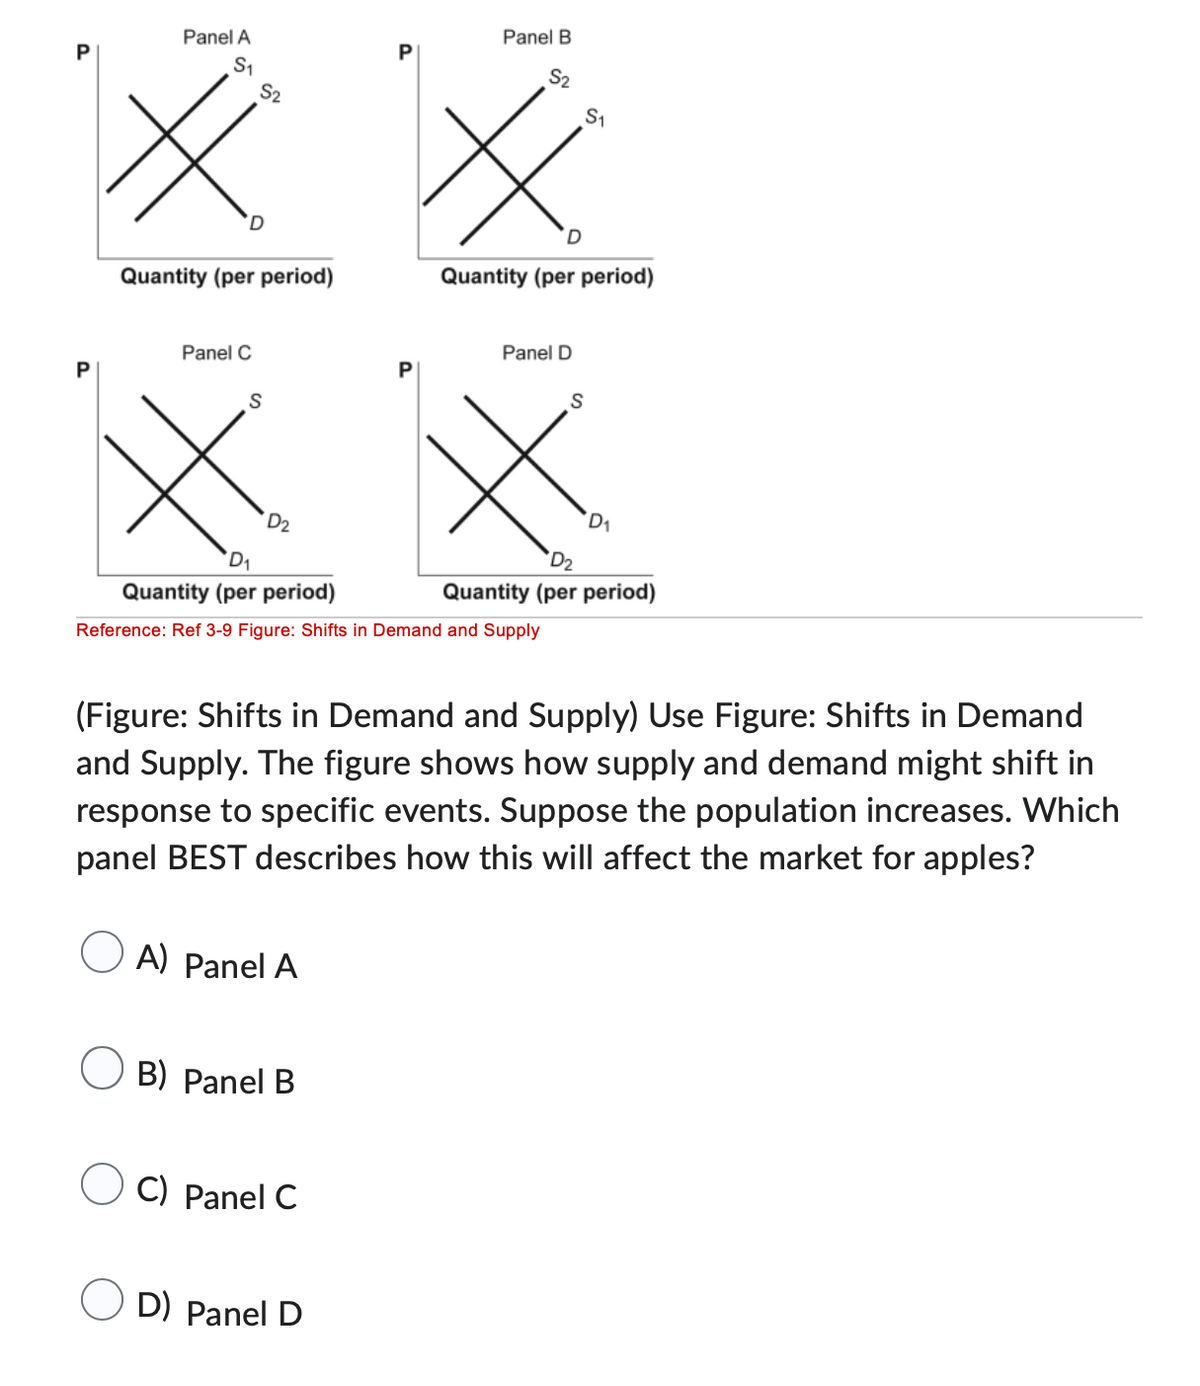 P
Panel A
S₁
X
D
S2
Quantity (per period)
Panel C
S
D₂
B) Panel B
P
C) Panel C
Panel B
D₁
Quantity (per period)
Reference: Ref 3-9 Figure: Shifts in Demand and Supply
OD) Panel D
S2
D
Quantity (per period)
Panel D
S₁
S
(Figure: Shifts in Demand and Supply) Use Figure: Shifts in Demand
and Supply. The figure shows how supply and demand might shift in
response to specific events. Suppose the population increases. Which
panel BEST describes how this will affect the market for apples?
OA) Panel A
D₁
D₂
Quantity (per period)